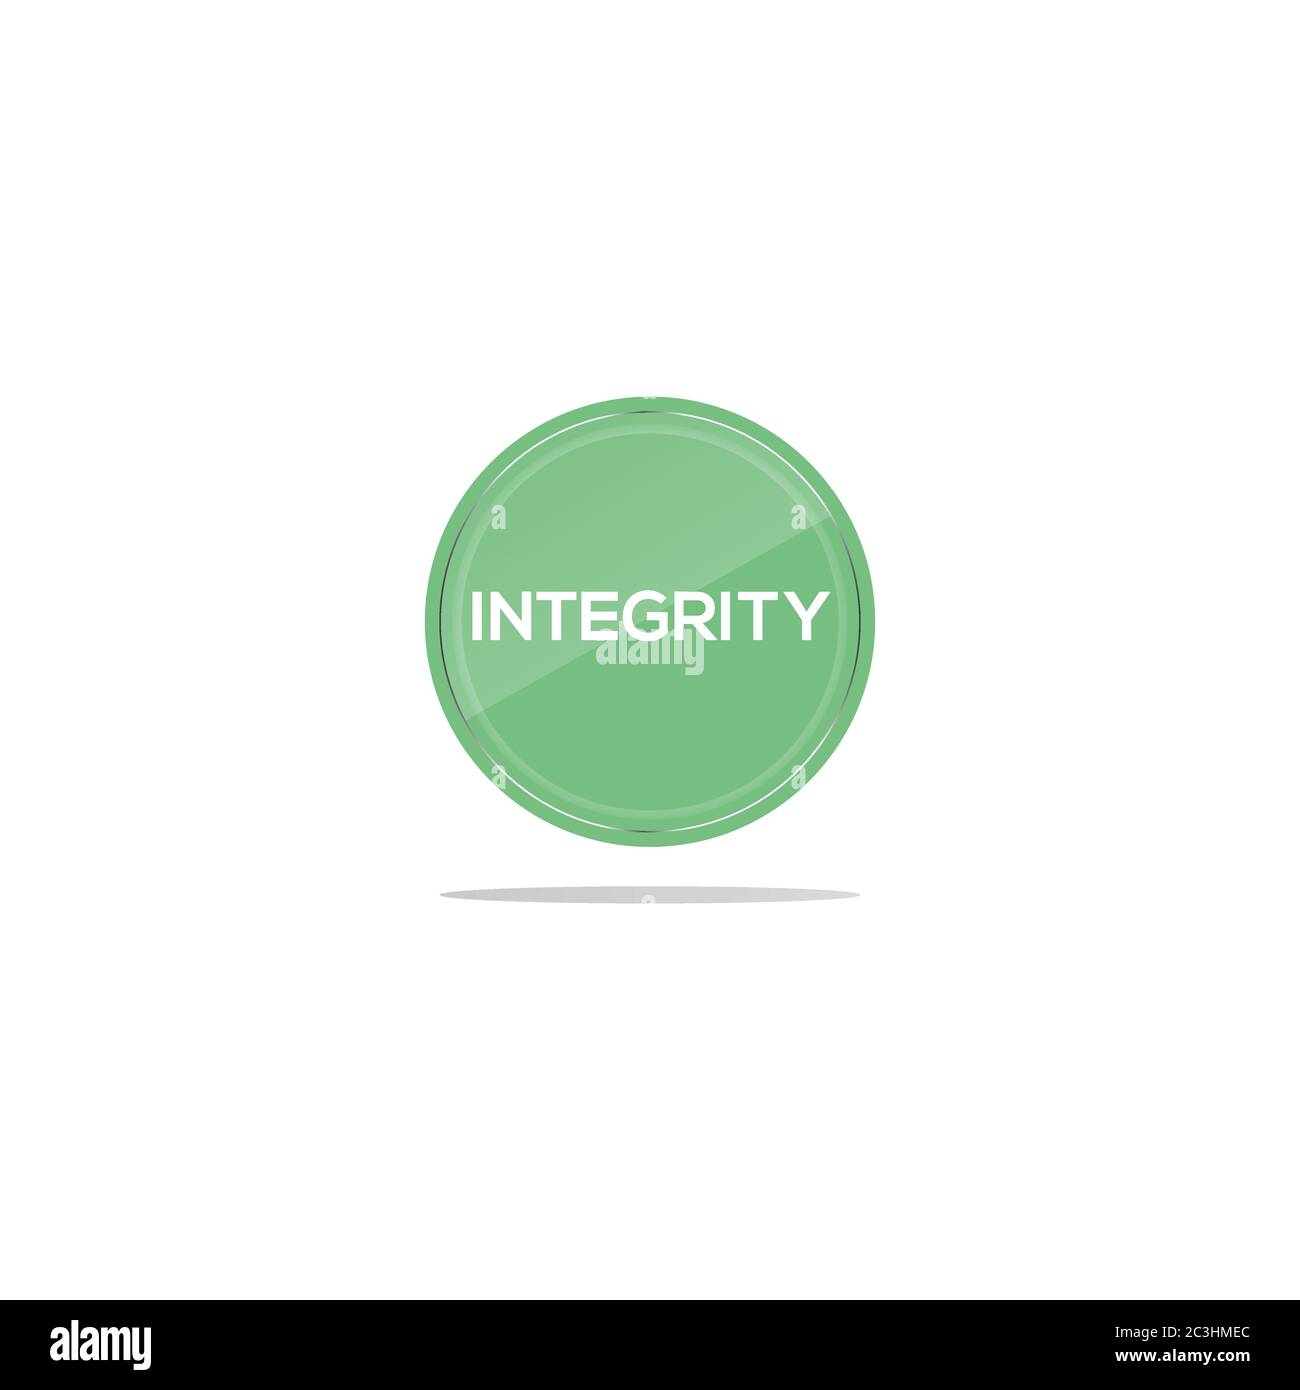 Writing integrity in a green circle. There is a circular glass in front of the integrity article. Stock Vector